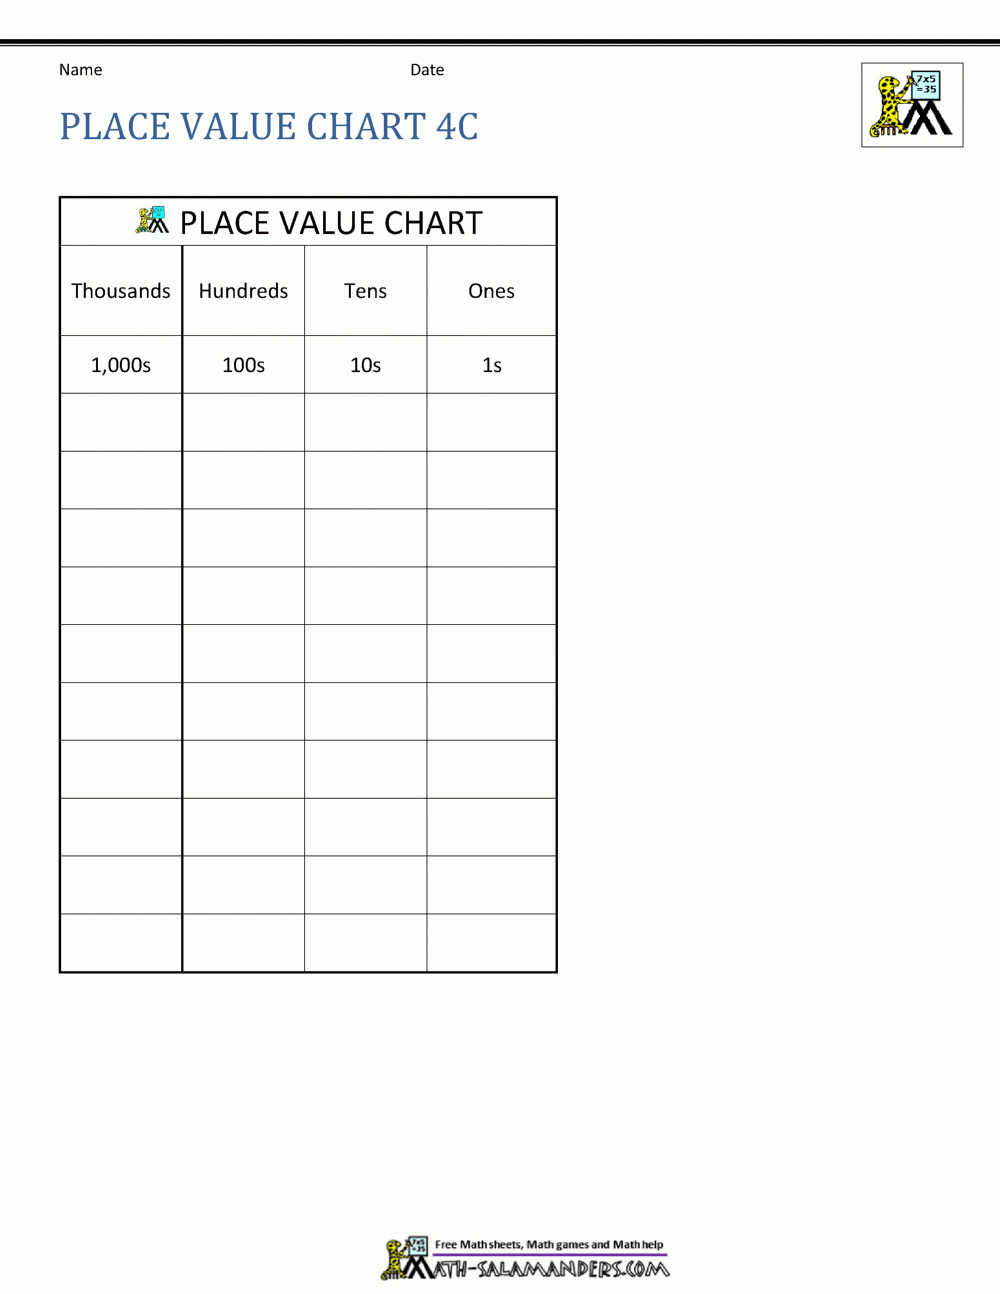 Place Value Charts - Free Printable Place Value Chart